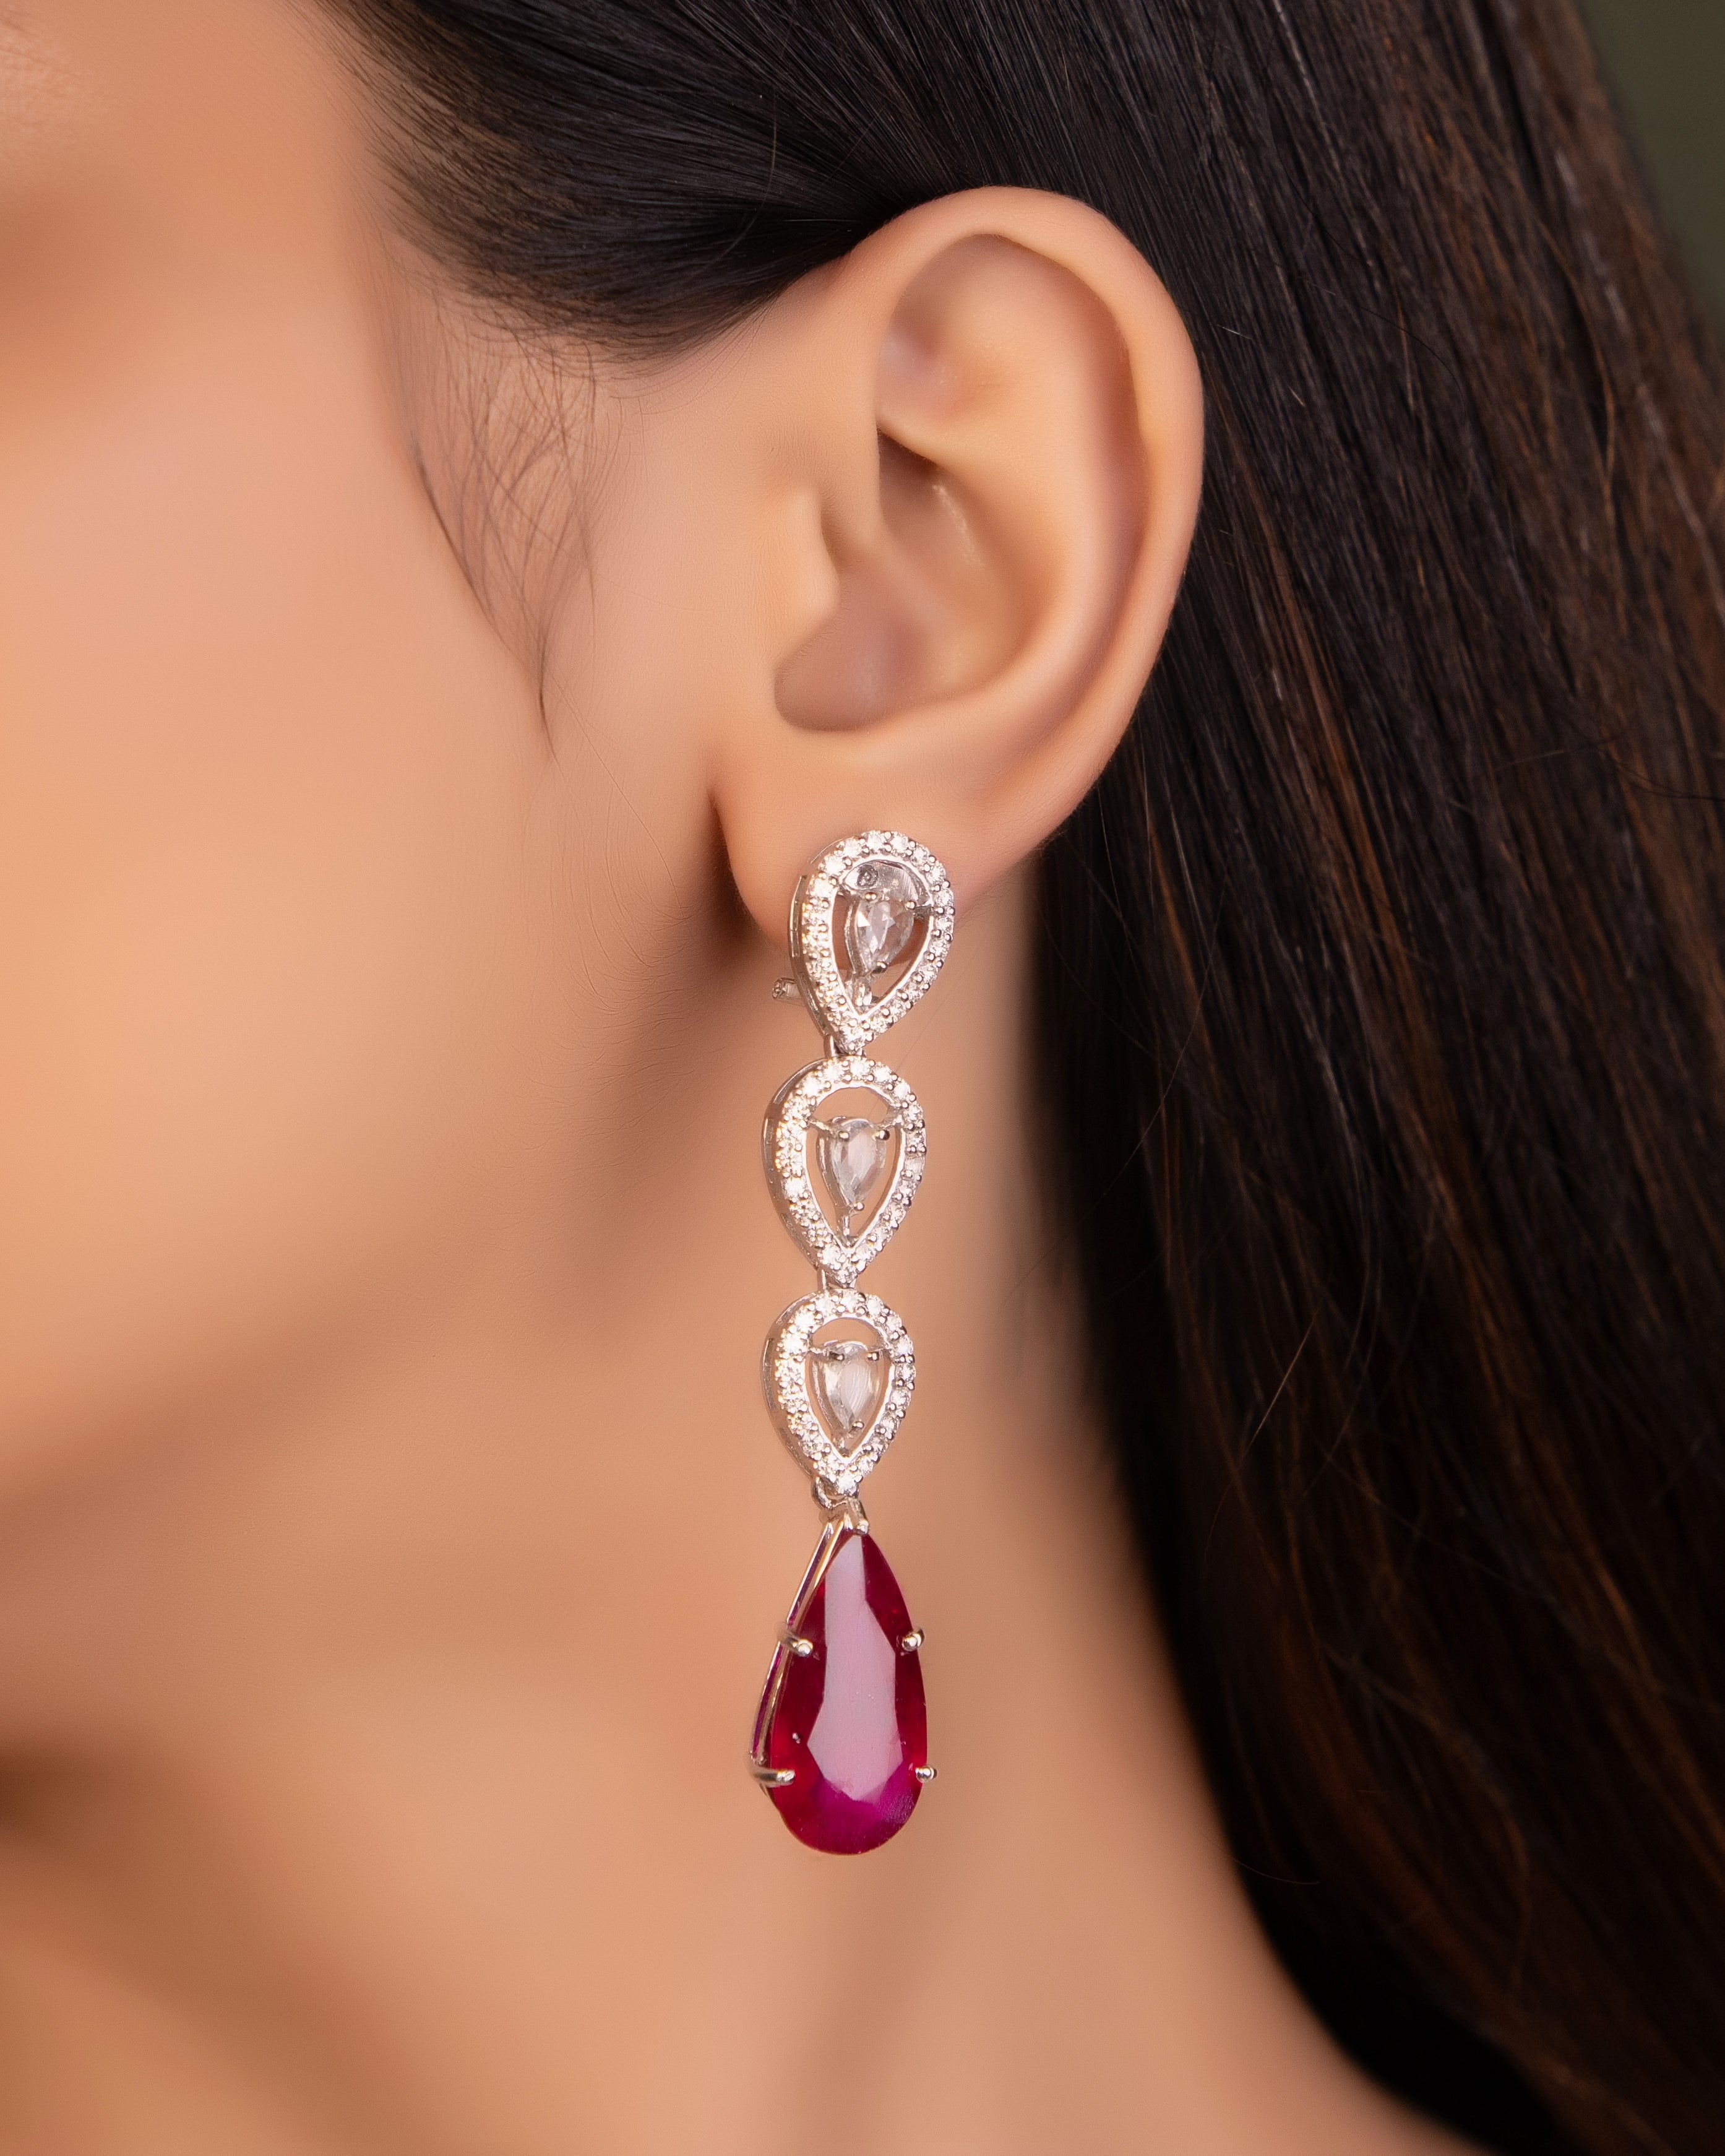 Buy Classy Long Diamond Cz Stones Silver Rhodium Plated Chandelier Earrings,indian  Jewelry,statement Earrings,diamond Earrings,indian Earrings Online in India  - Etsy